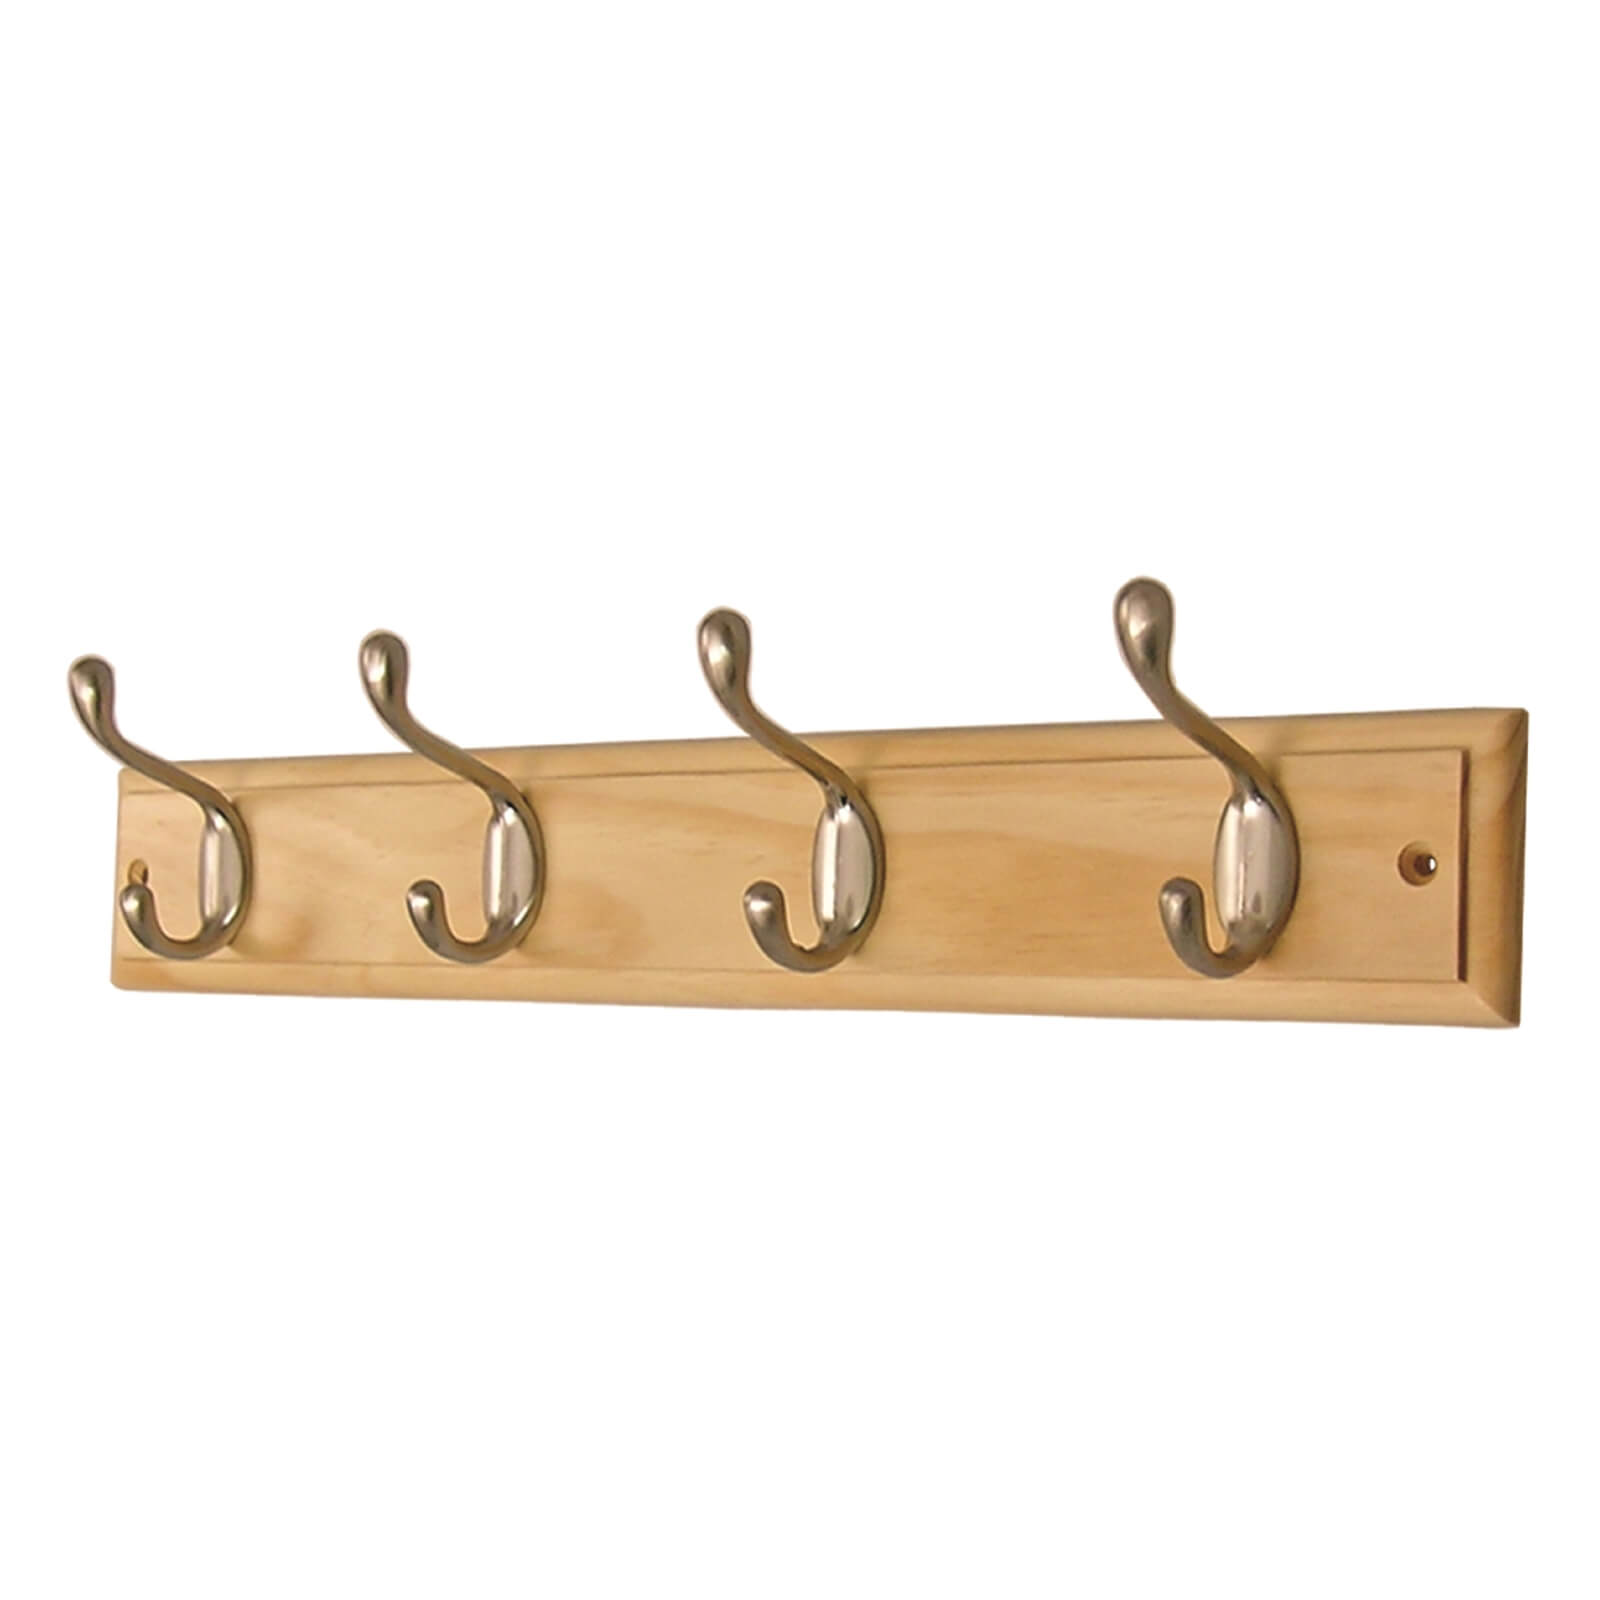 4 Hat and Coat Hooks - Satin Nickel on Pine Board